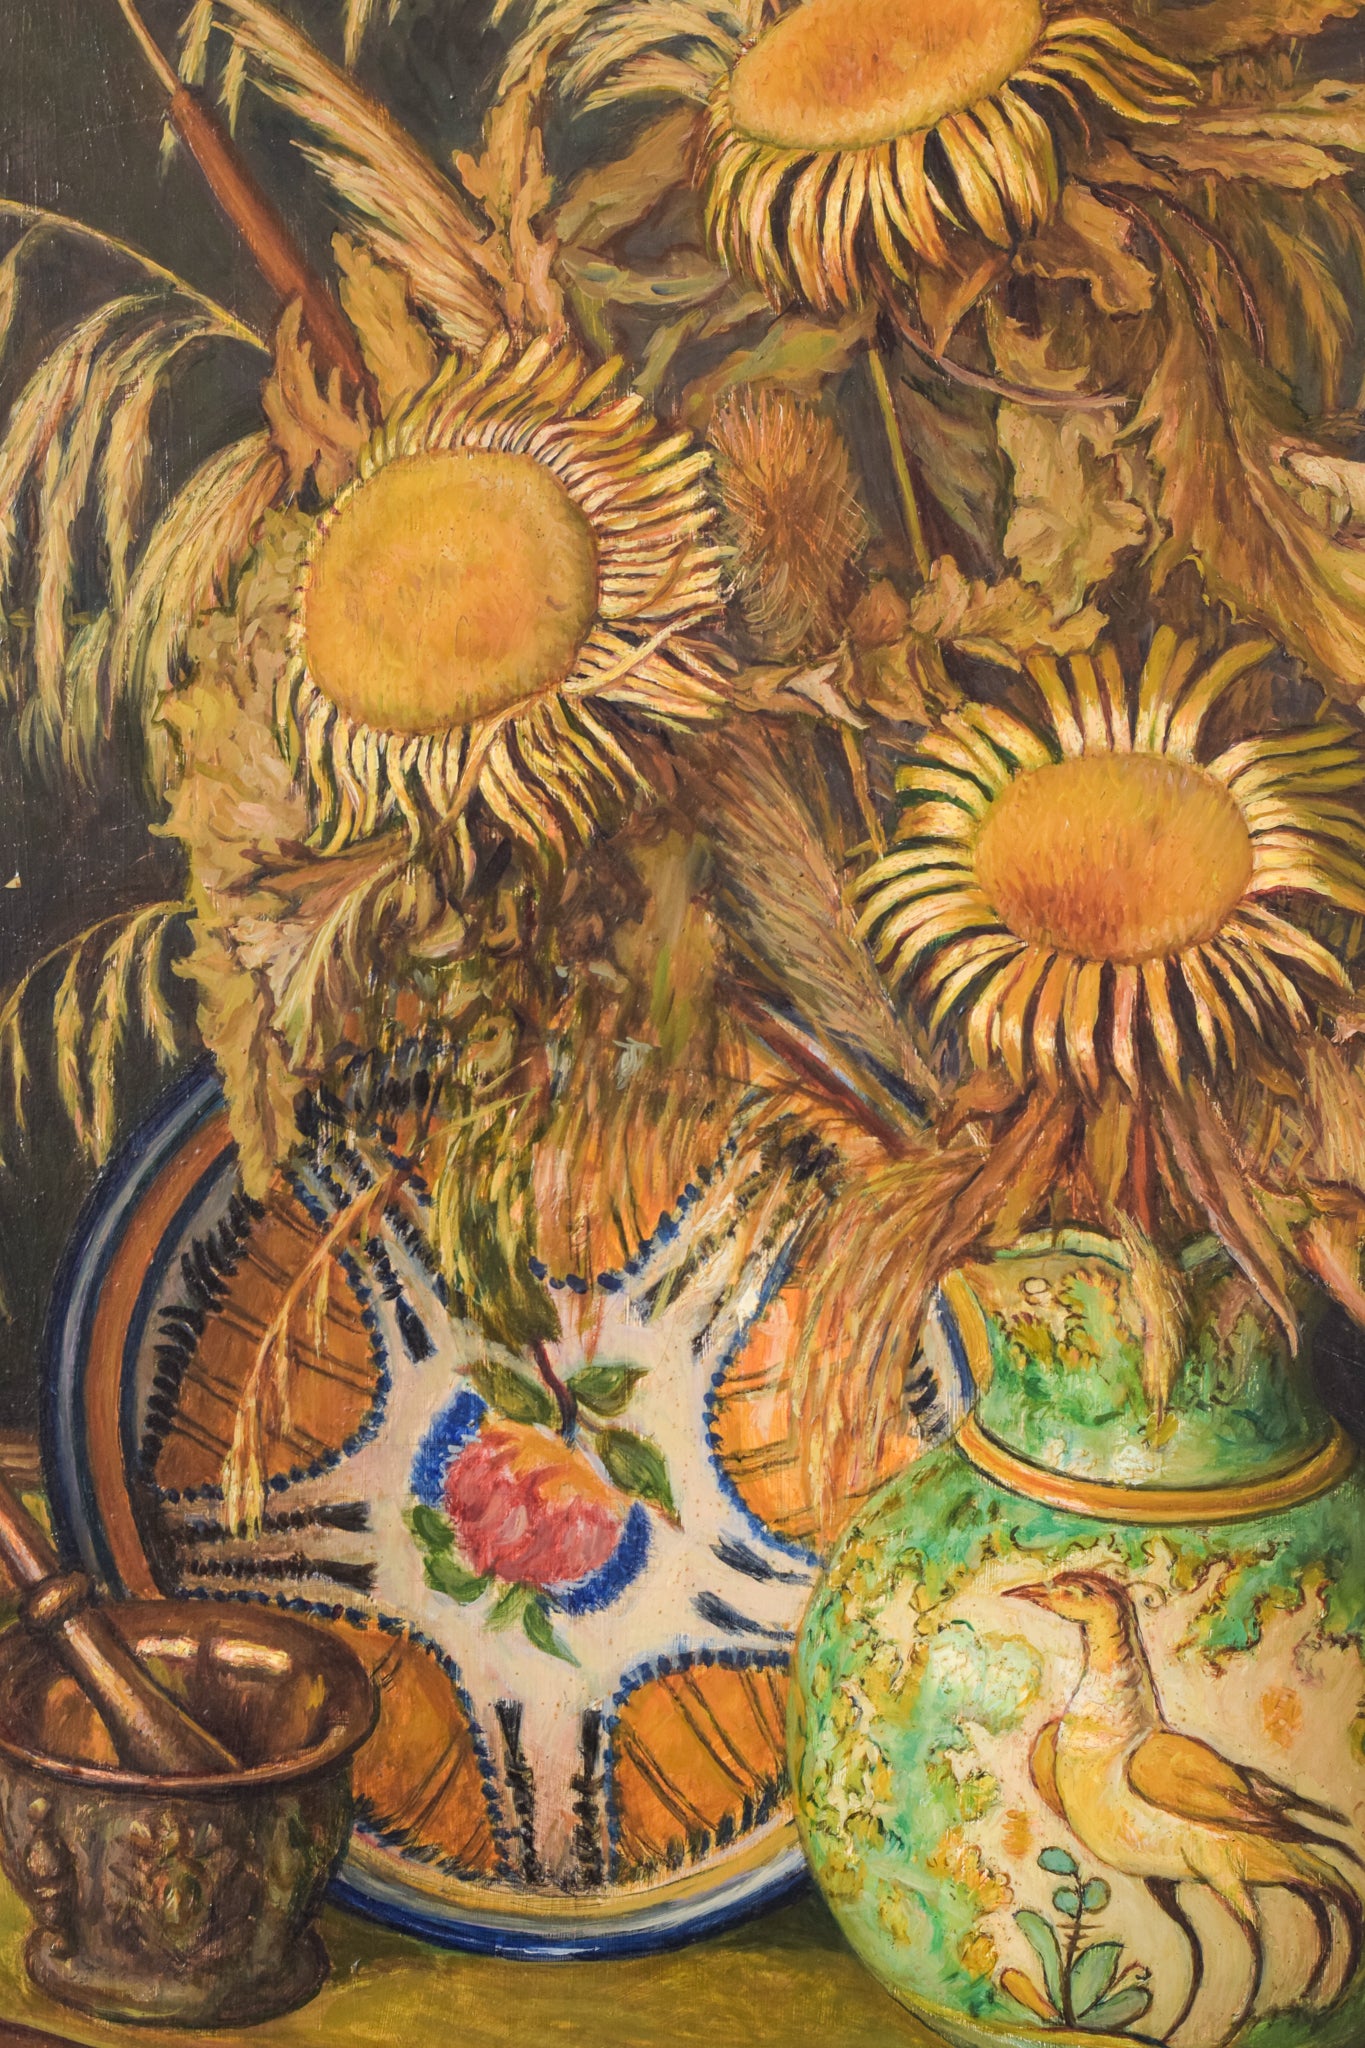 Magnificent Still Life - Sunflowers and Majolica Jug